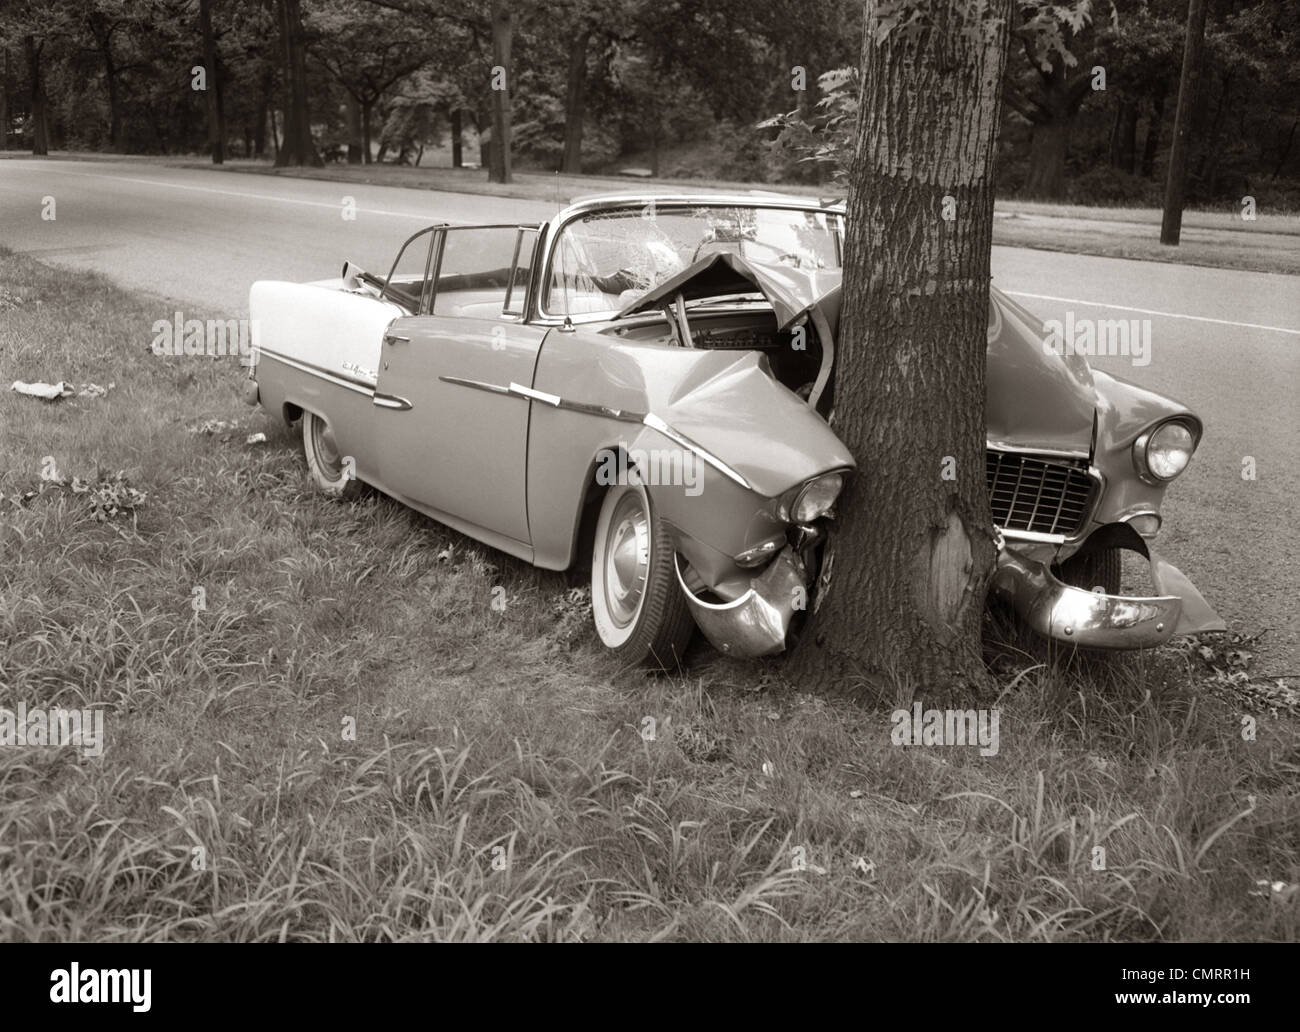 1950s CONVERTIBLE CRASHED HEAD-ON INTO A TREE OUTDOOR Stock Photo